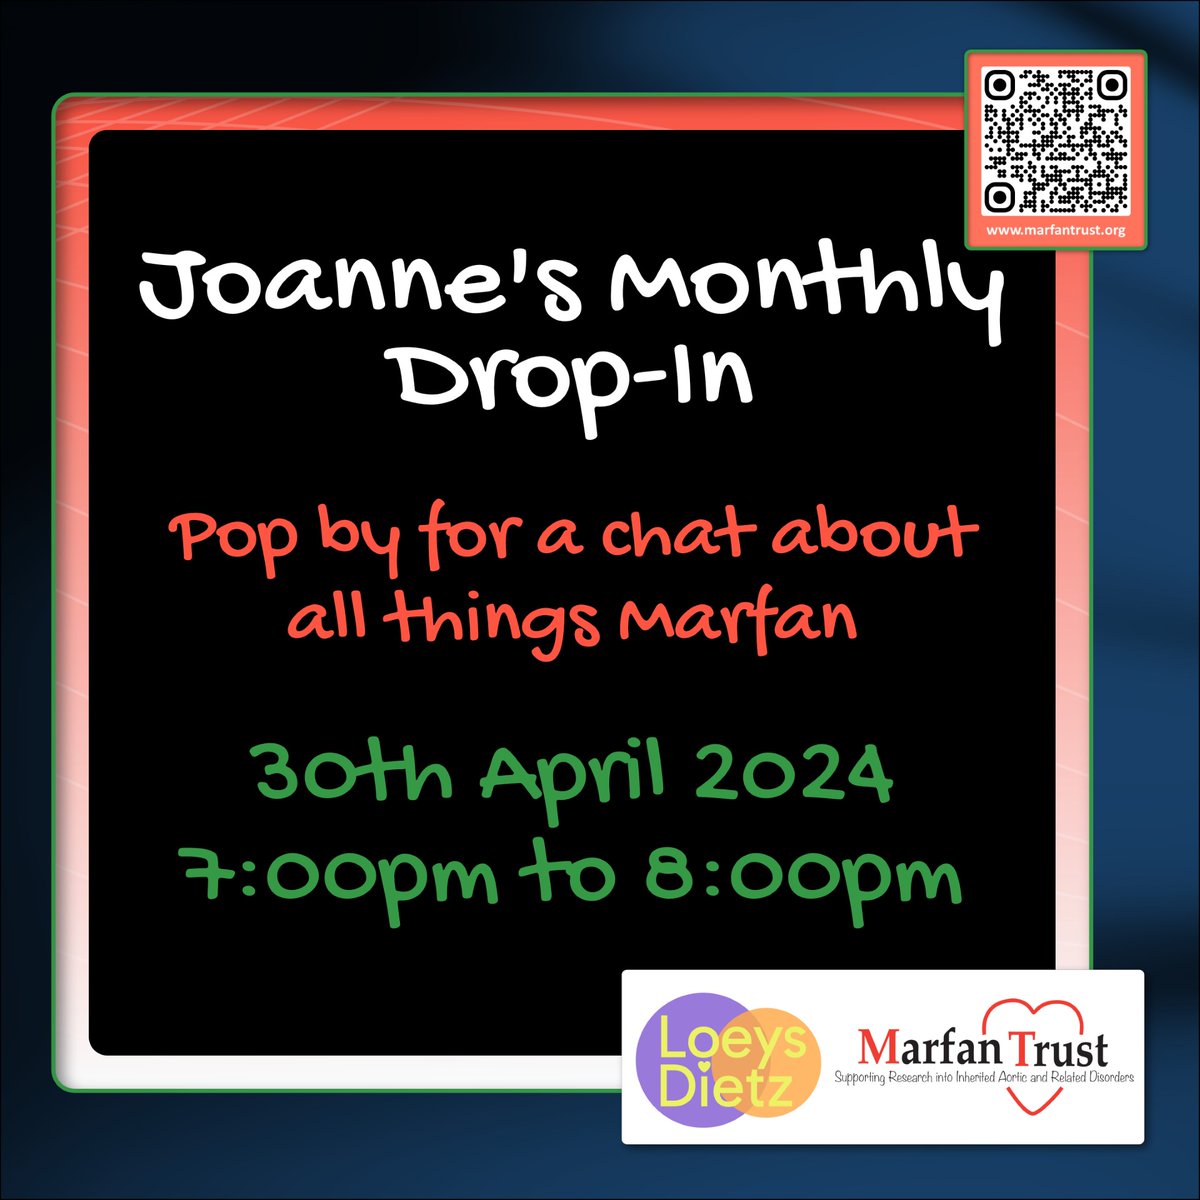 Joanne's Drop-In resumes this Tuesday - tomorrow - at 7pm. Why not pop in for an informal conversation on #Marfan matters. It's an opportunity to meet your fellow supporters and share common concerns in a friendly environment. tinyurl.com/ywxbacxa